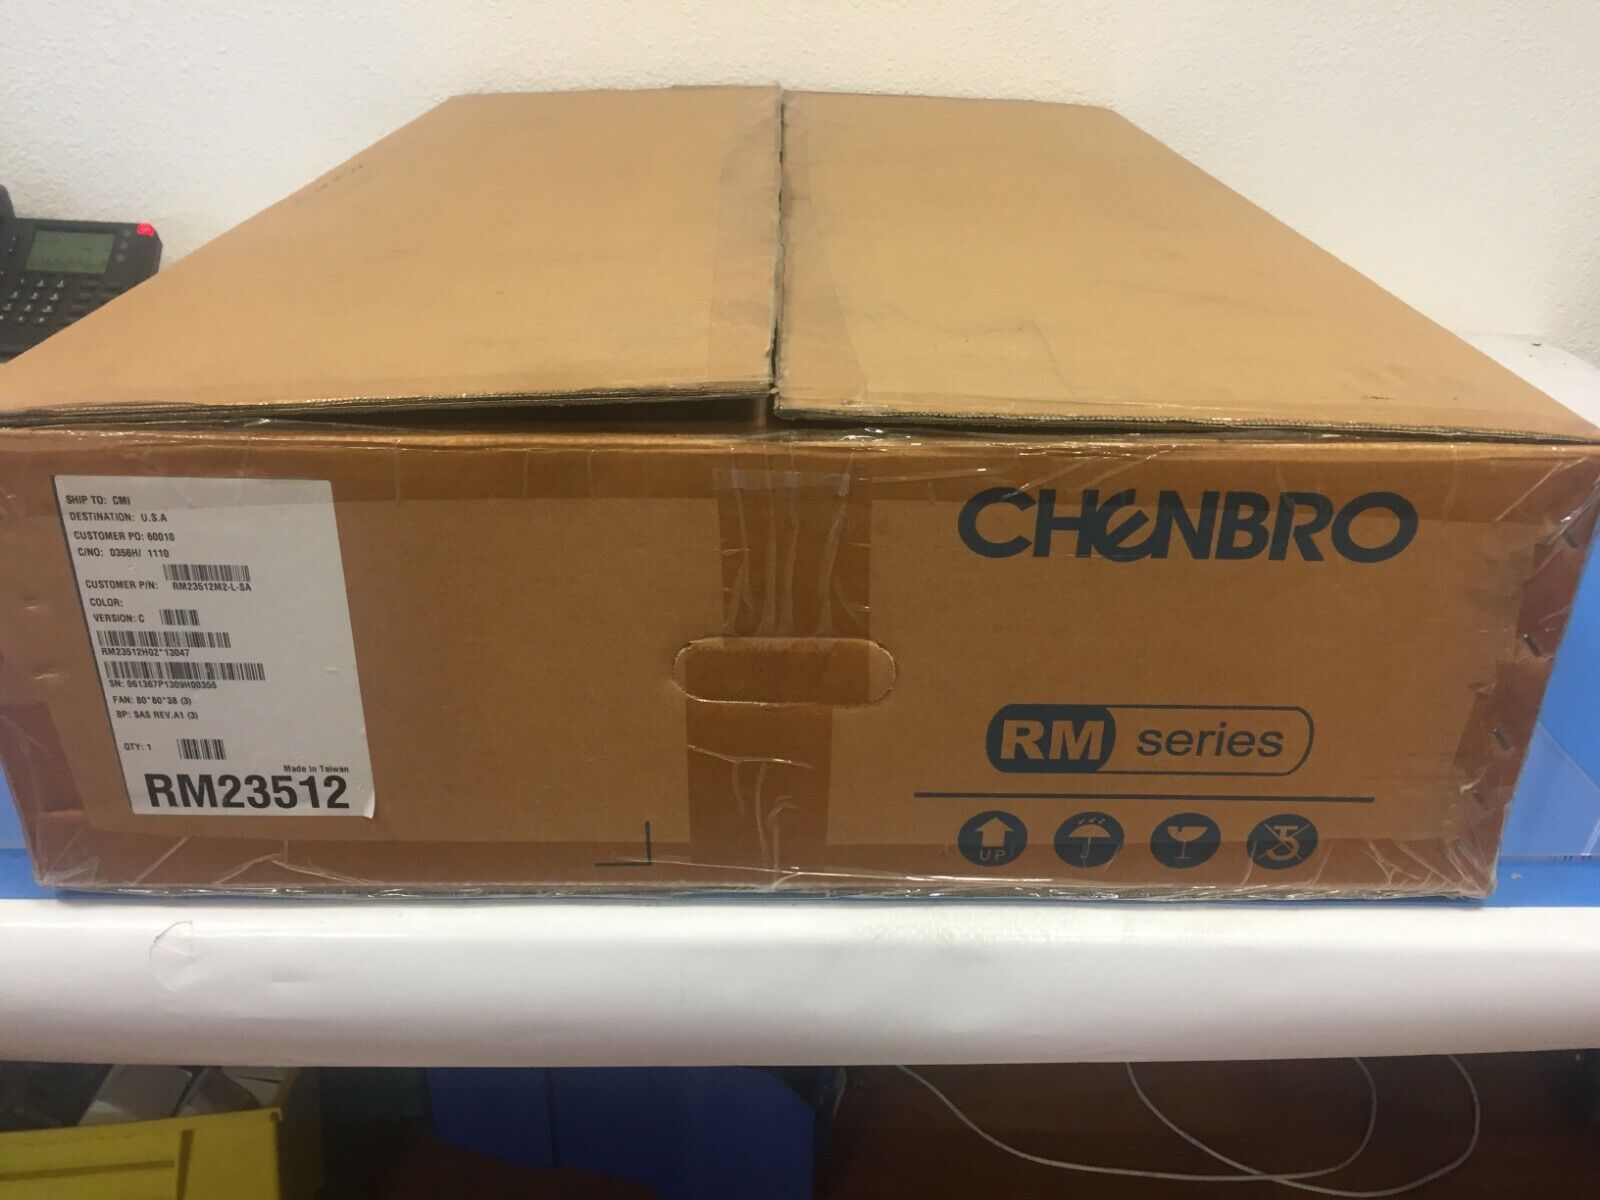 Chenbro RM23512M2-L-SA RM Series Storage Chassis Comes with Hardware